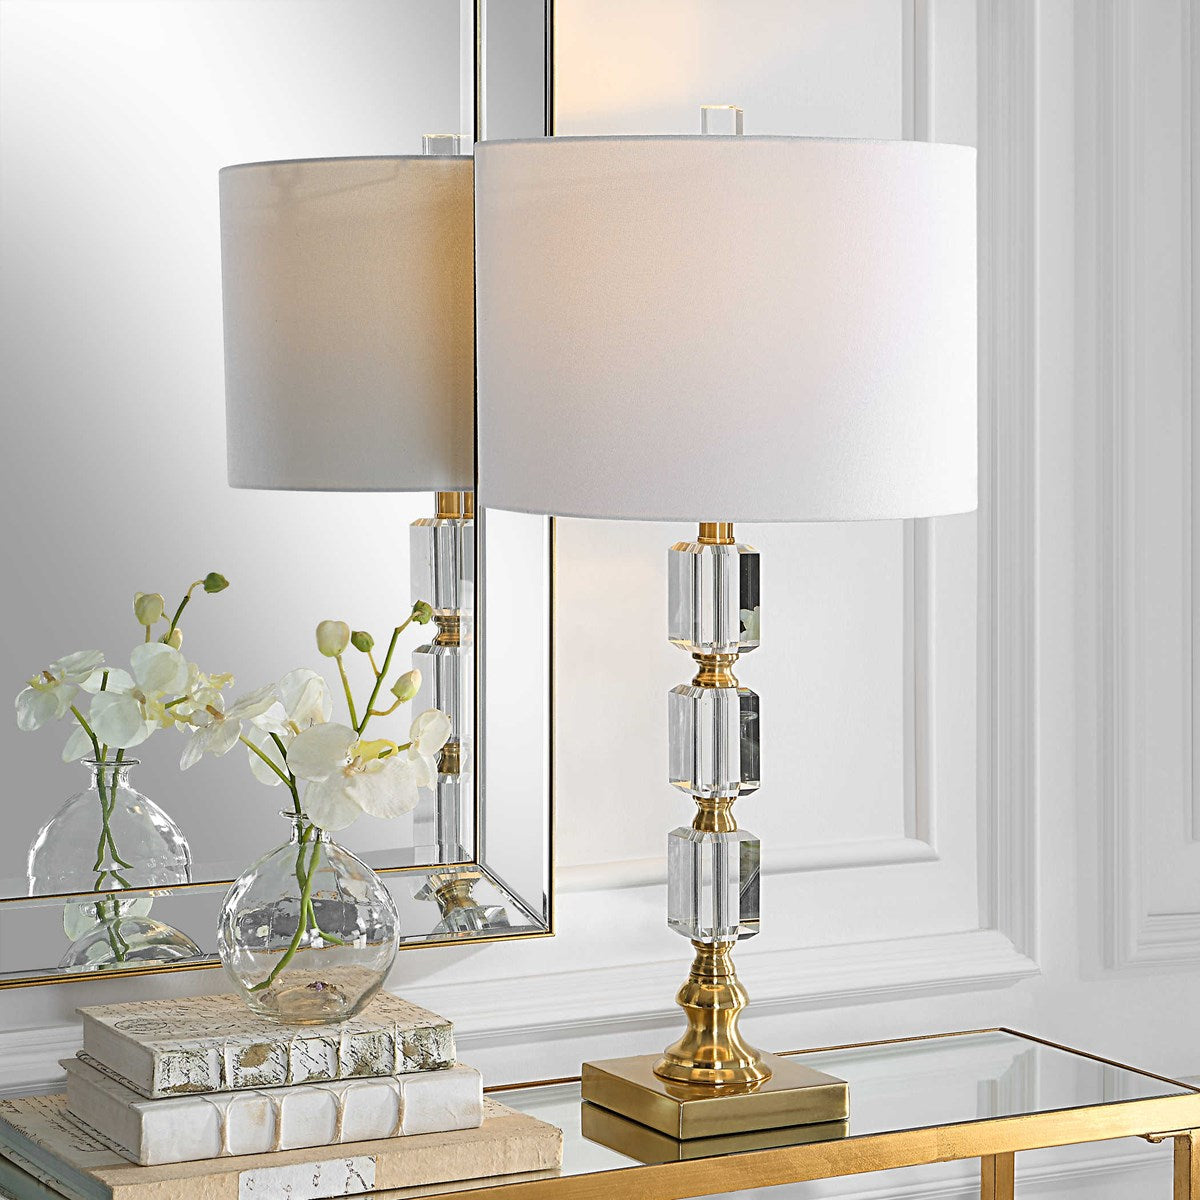 Uttermost, Acadia Table Lamp